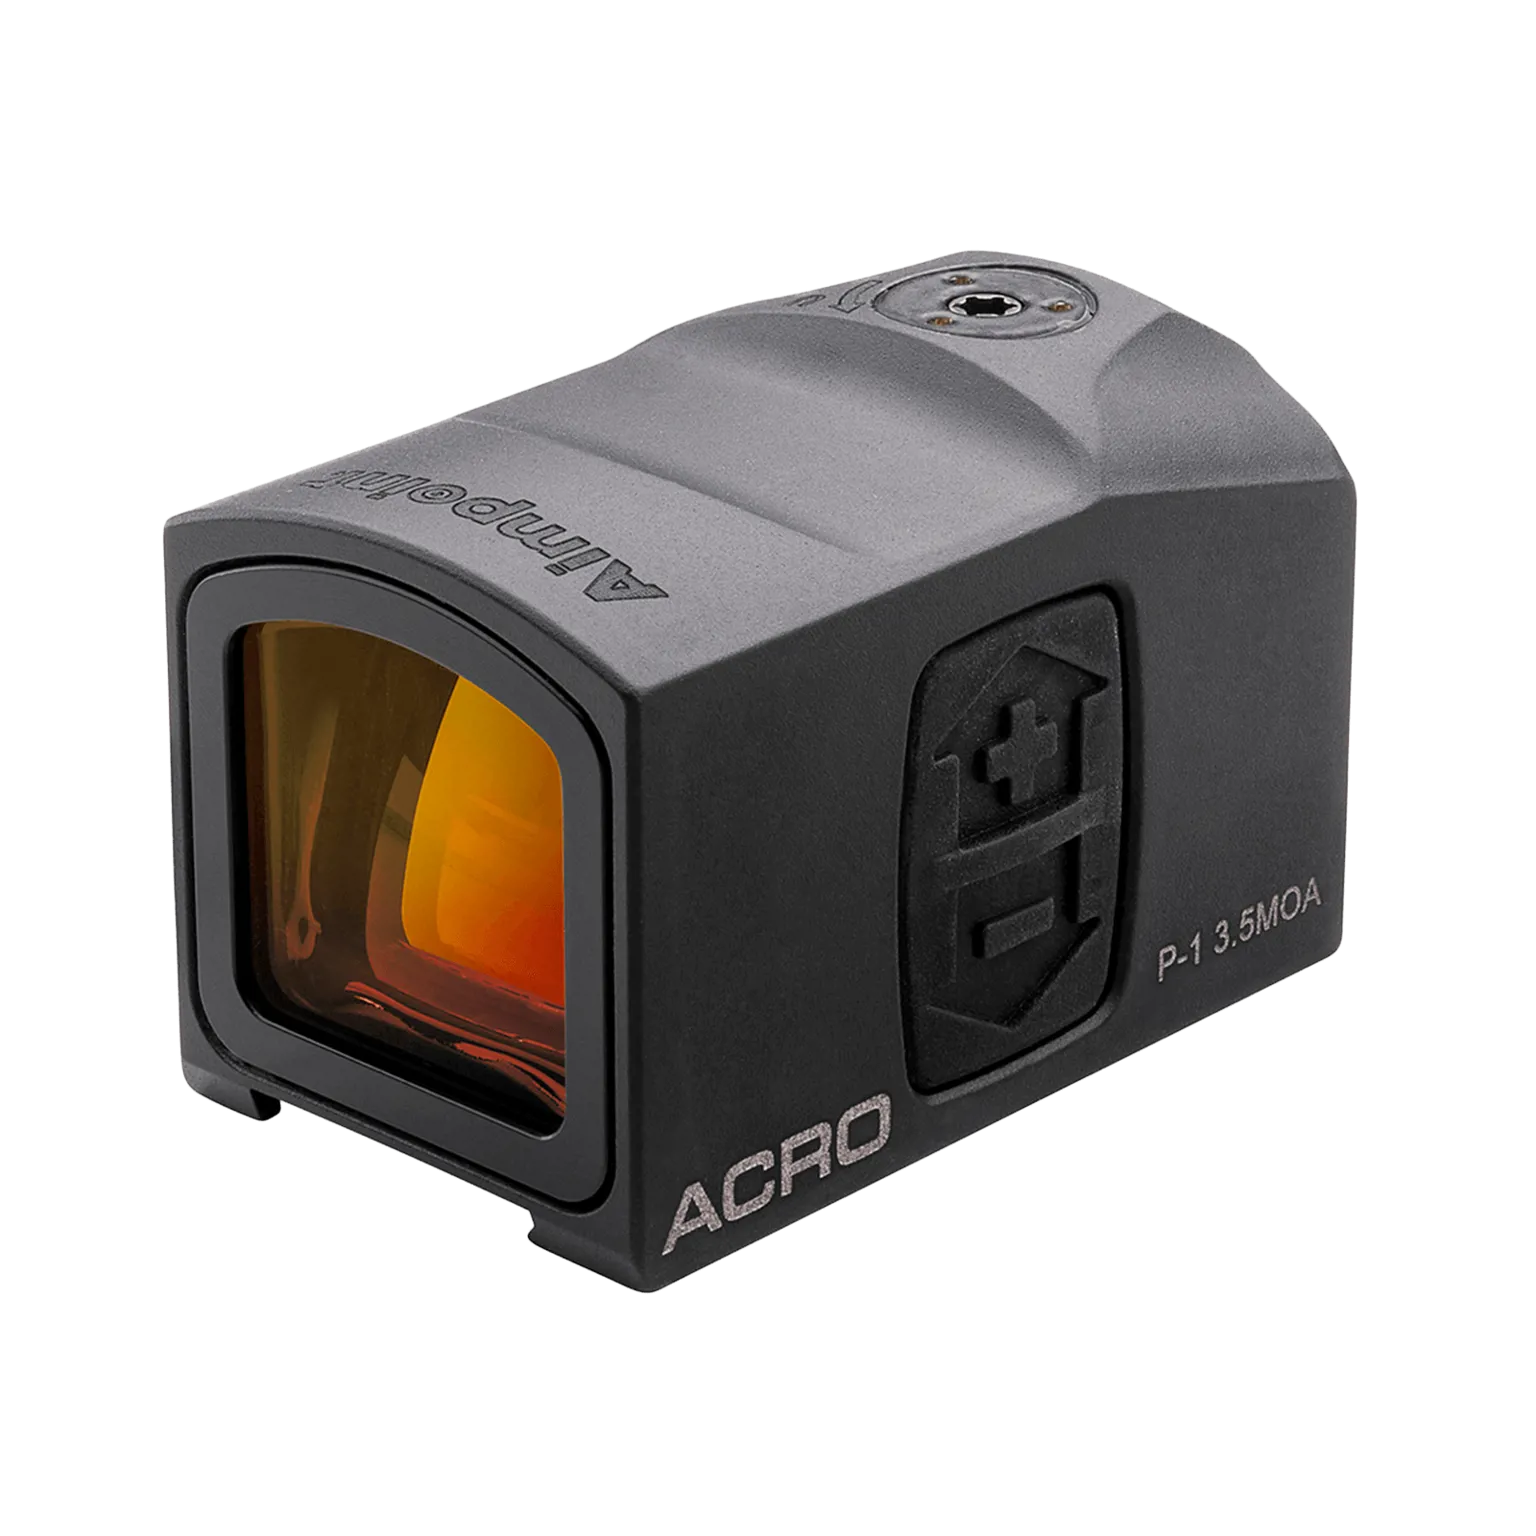 Acro P-1™ 3.5 MOA - Red dot reflex sight with integrated Acro™ interface - 1